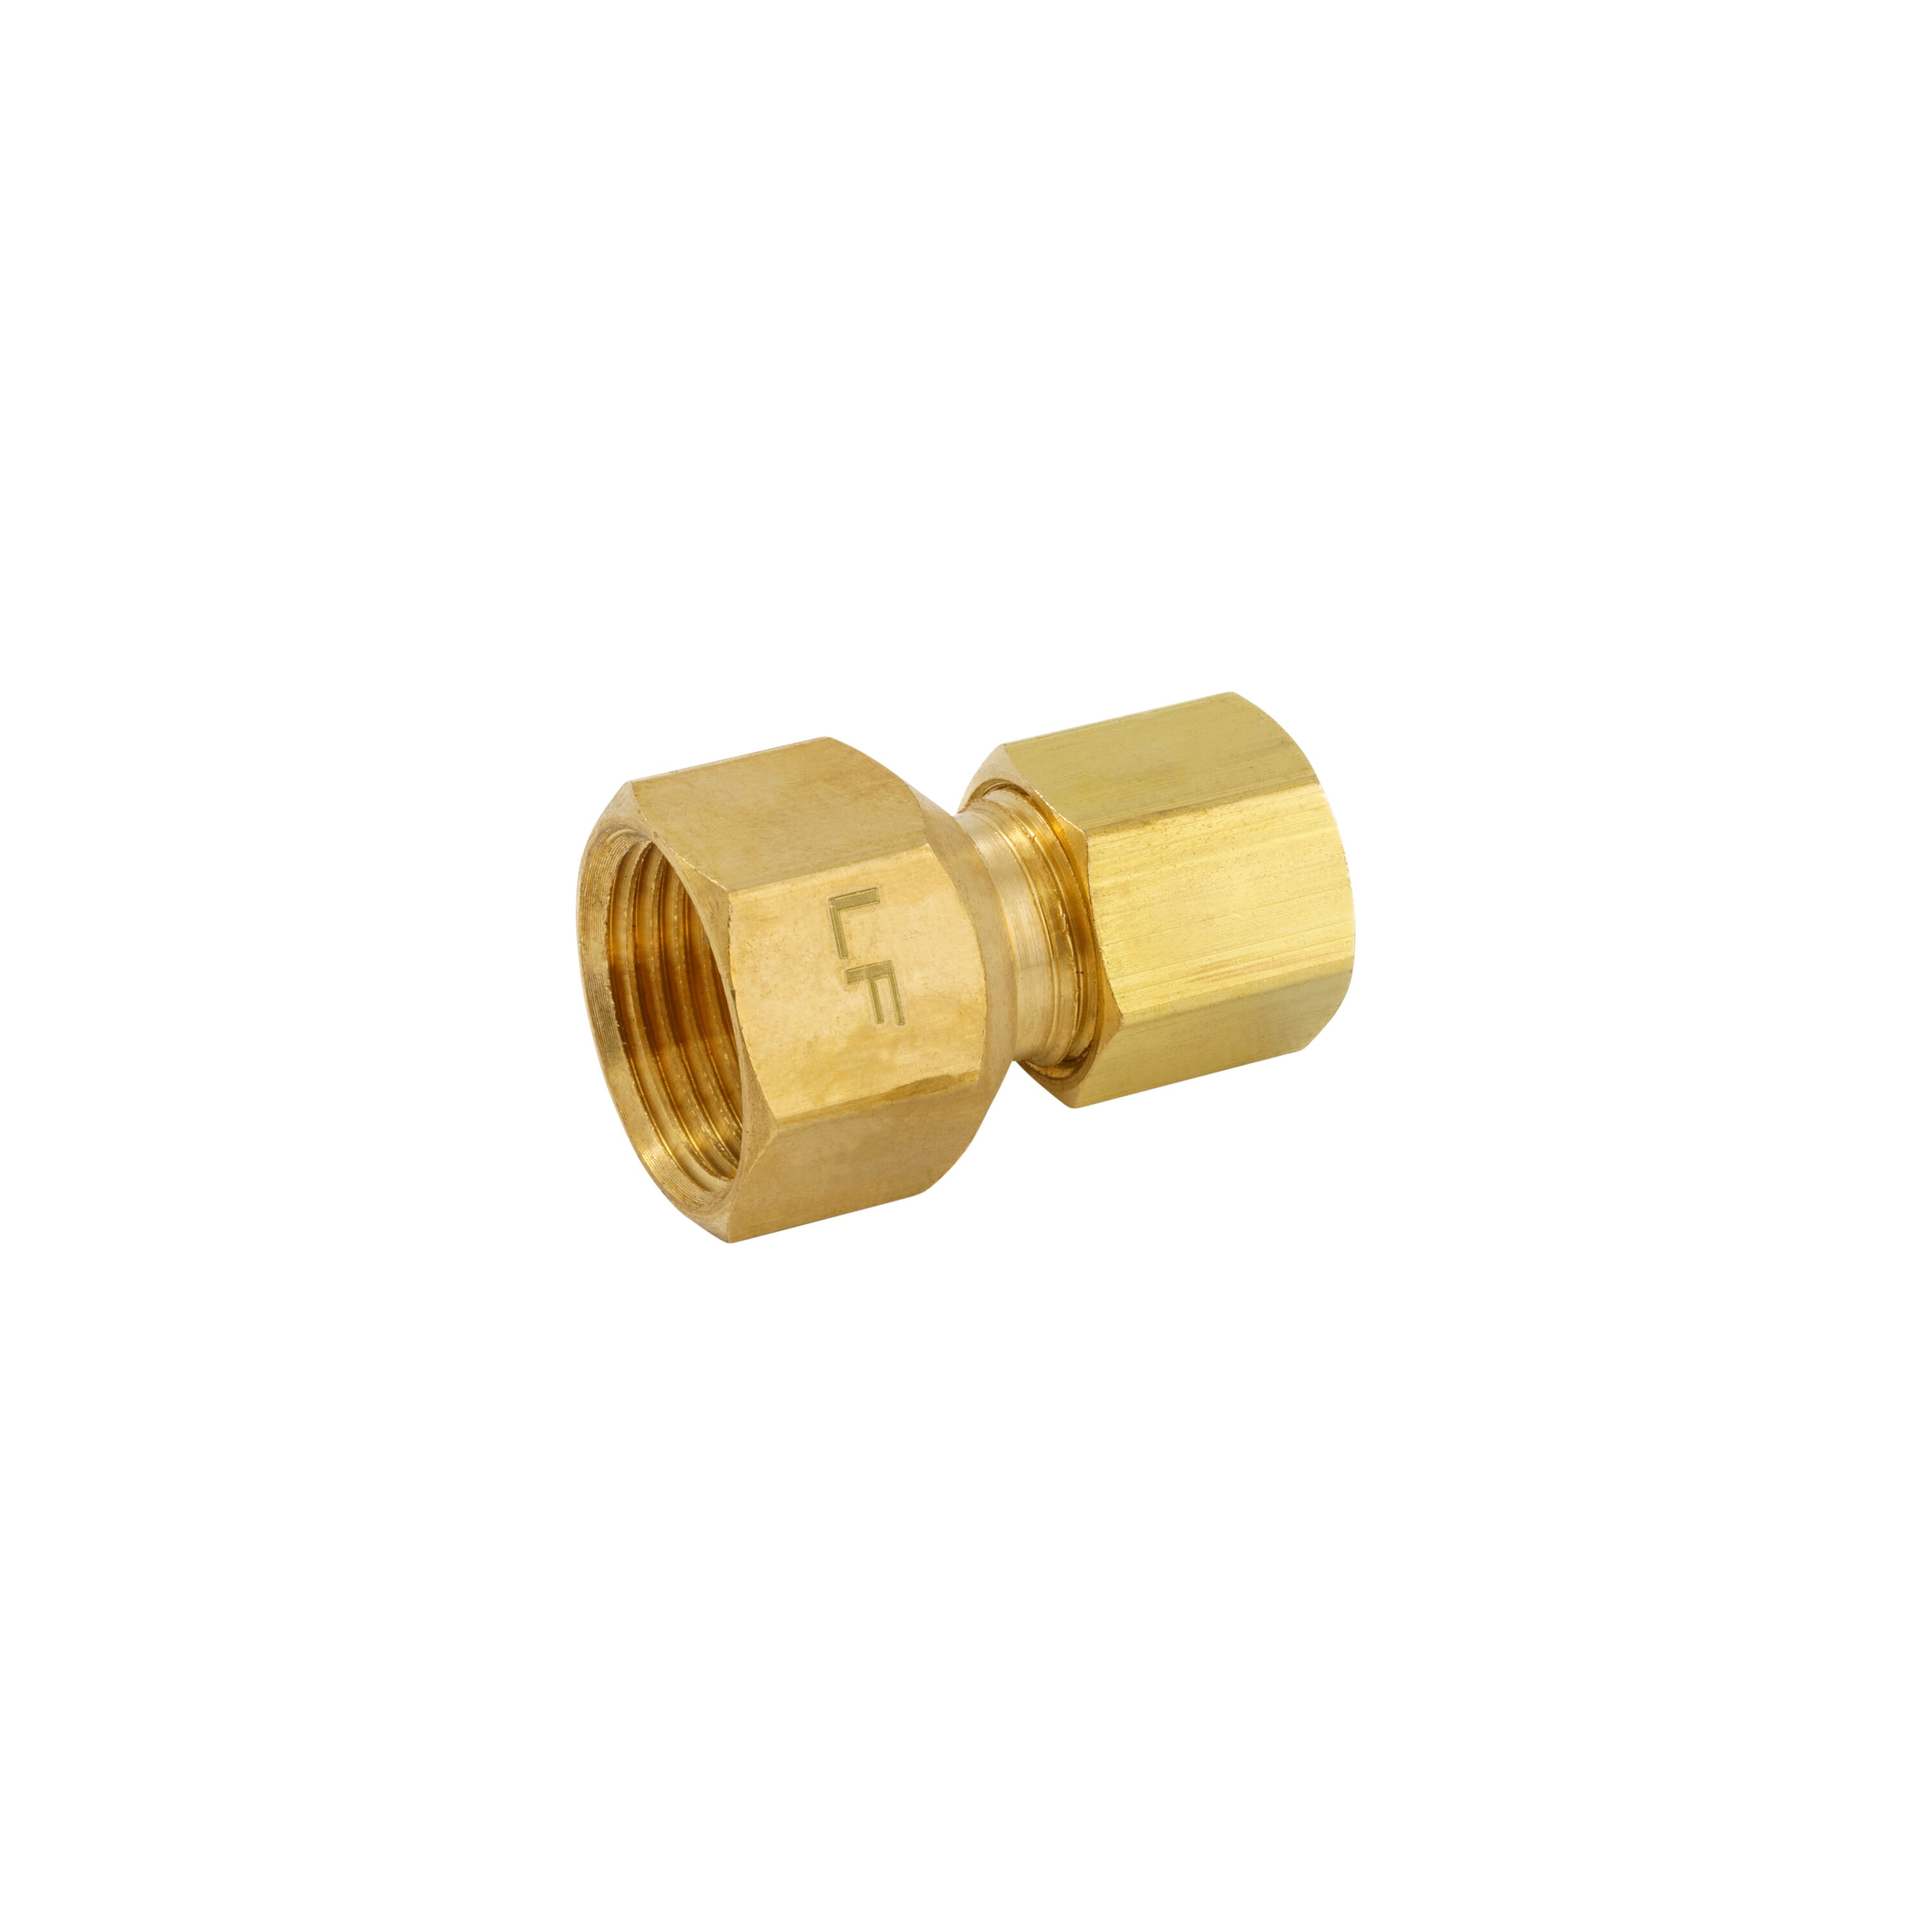 1/4 Brass Compression x 1/4 NPTF Male 90 Degree Elbow/Corner Adapter  Fitting | 369-04-04 (5-PACK)